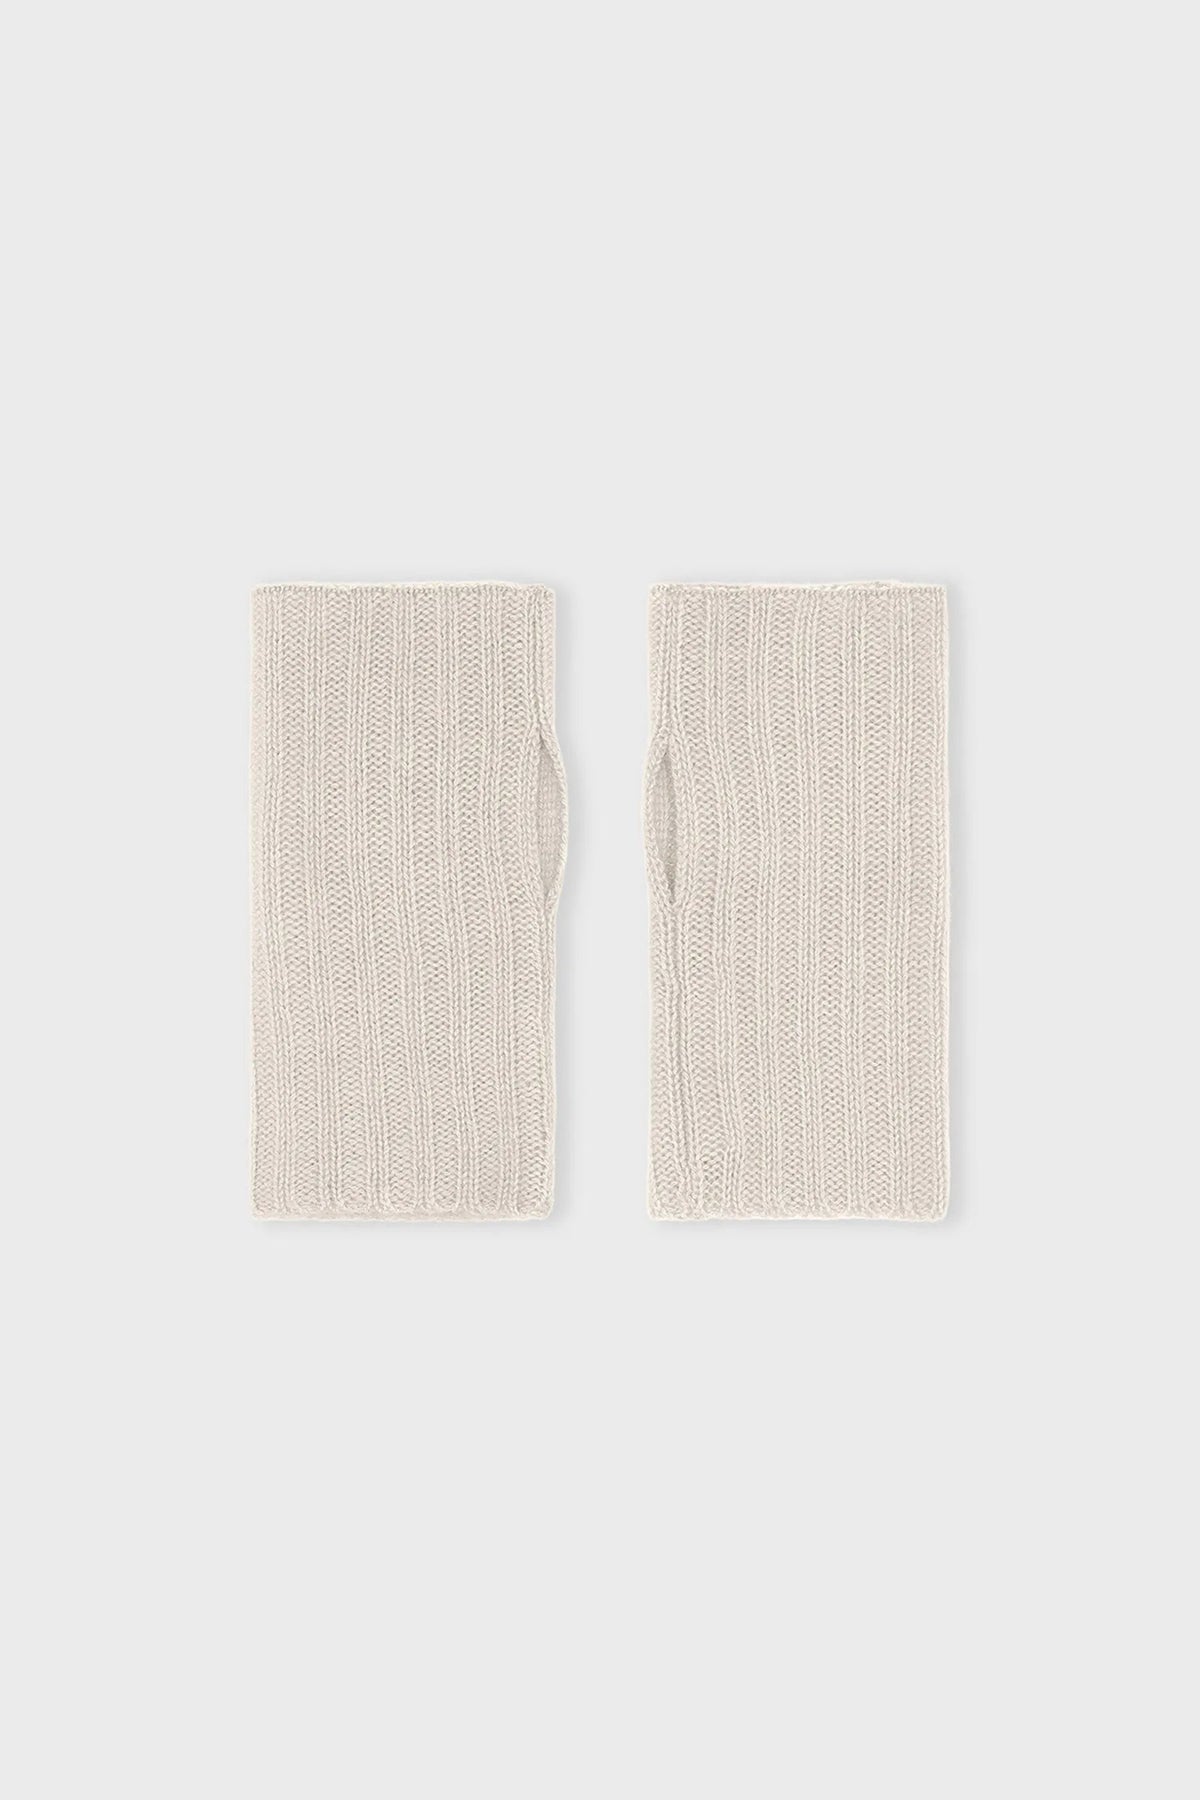 CARE BY ME 100% Cashmere Womens Sussie Handwarmers